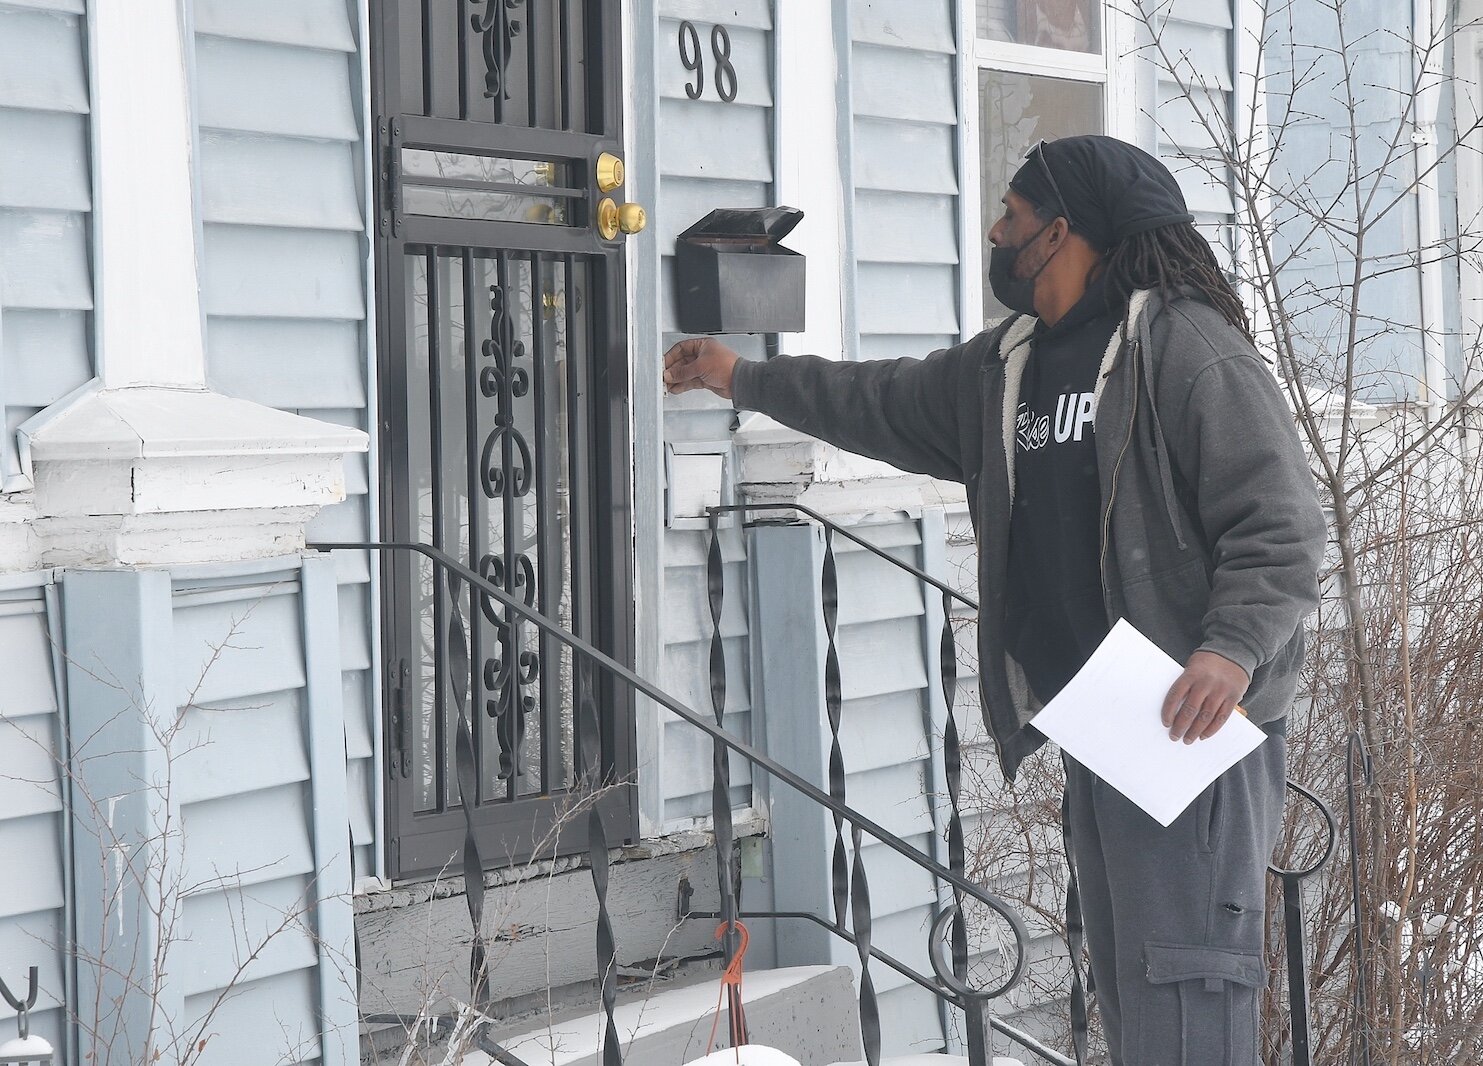 Jermaihn Williams is one of the RISE canvassers who go door to door trying to interest residents in the smart doorbells.